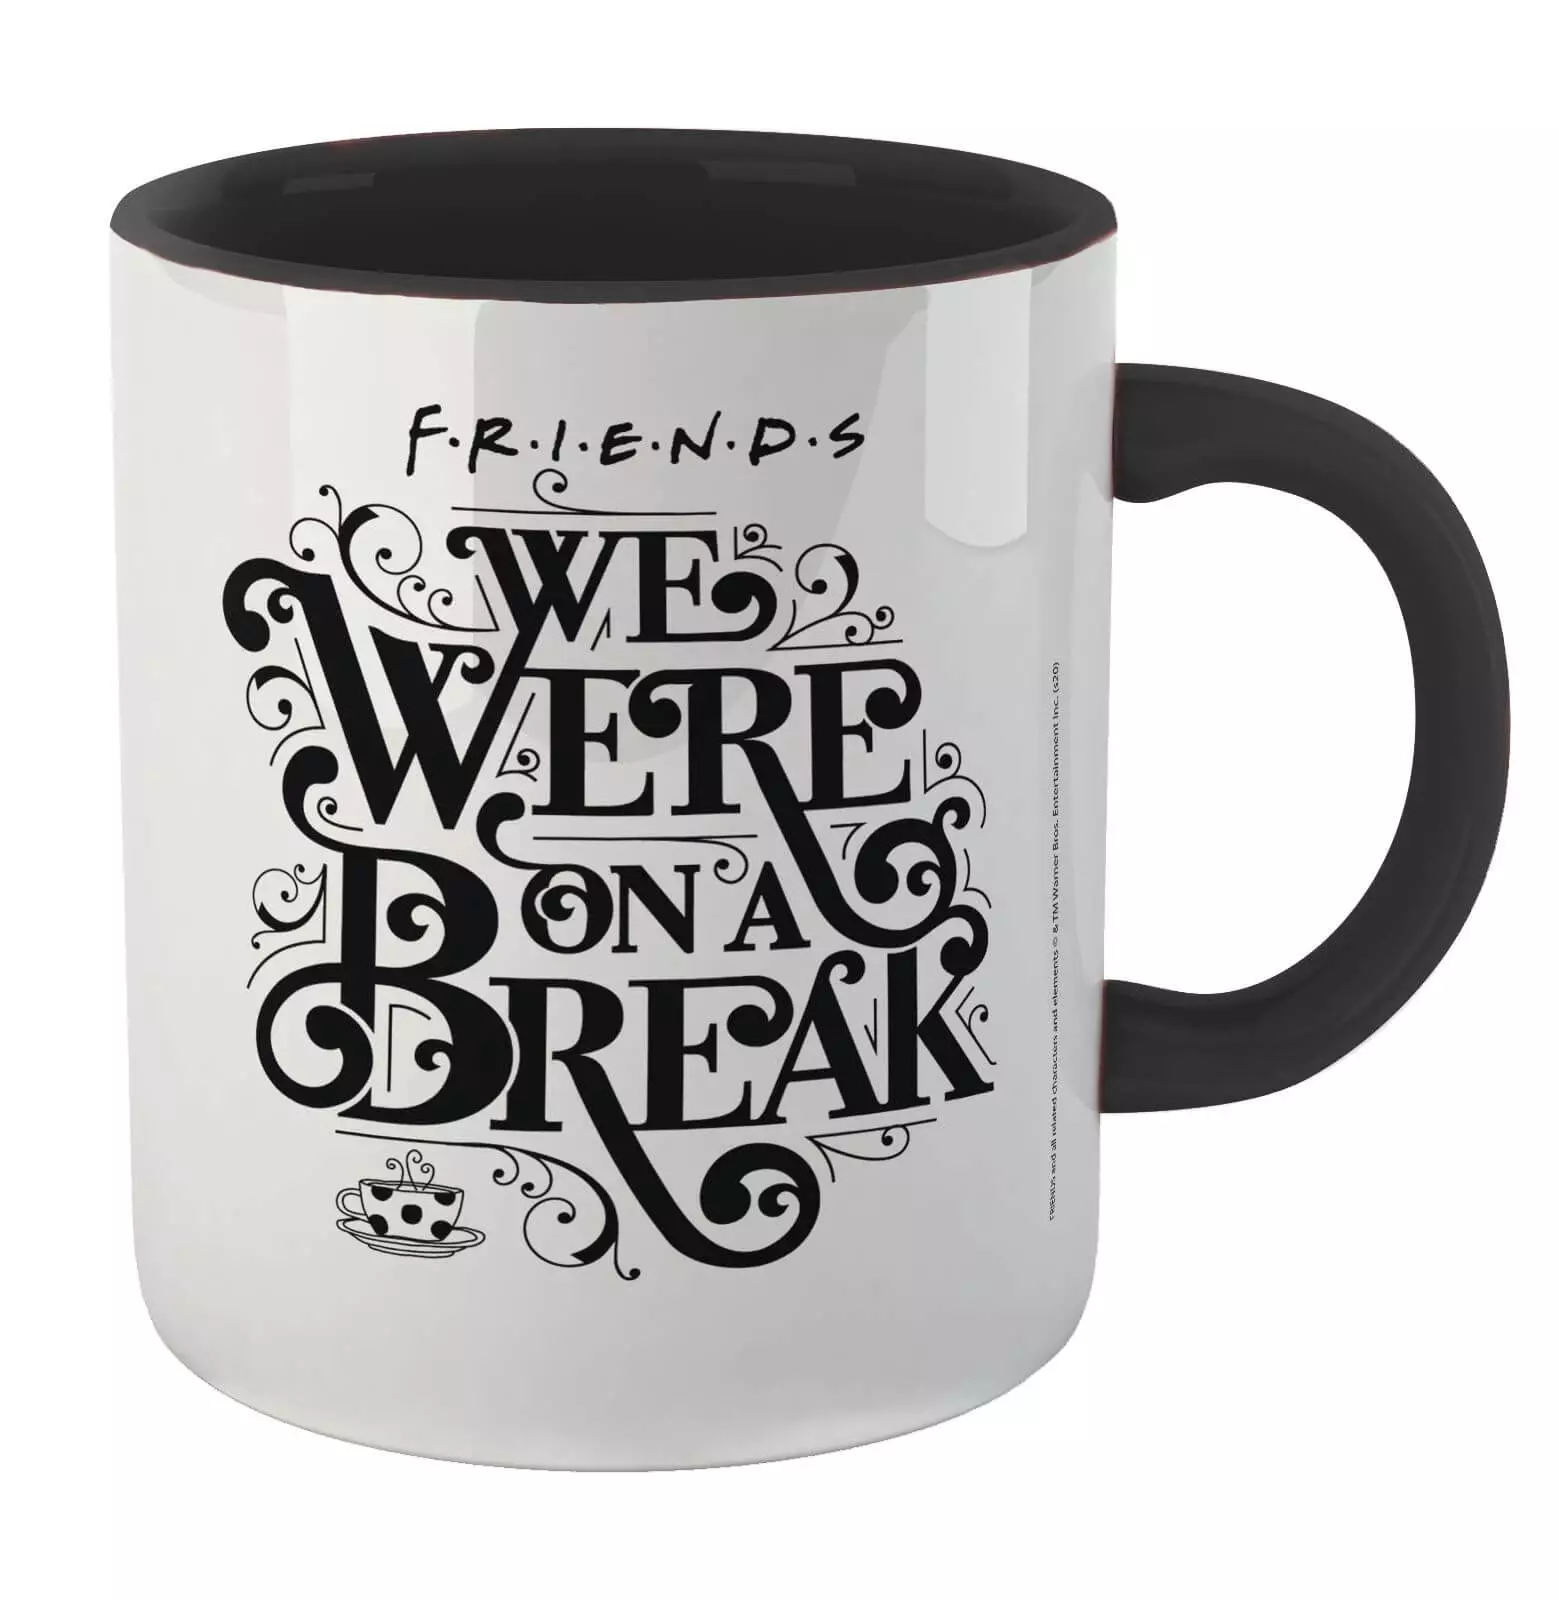 Drop a not-so-subtle hint to an ex with this mug, £7.99 (